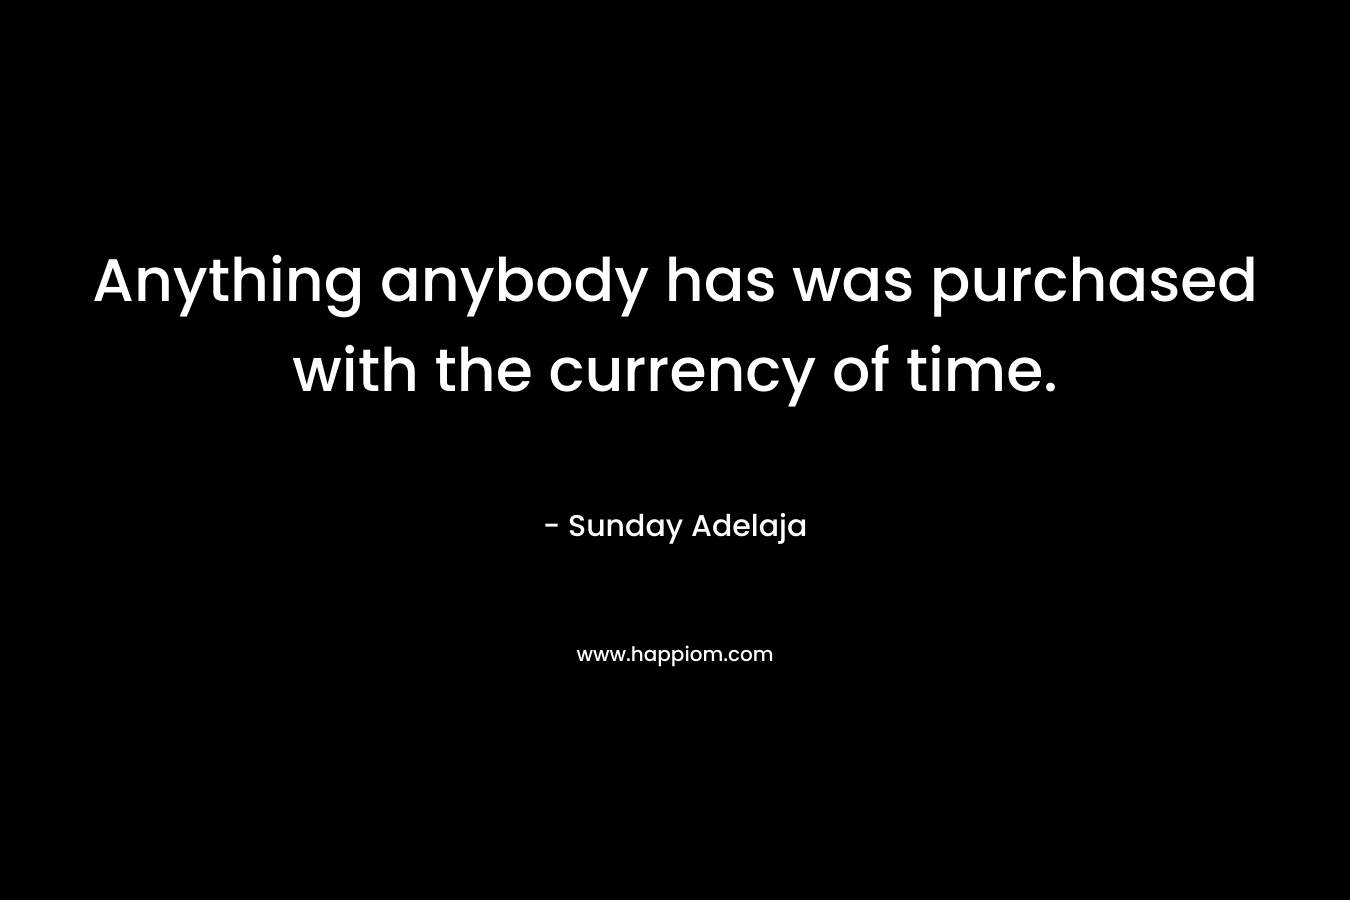 Anything anybody has was purchased with the currency of time.